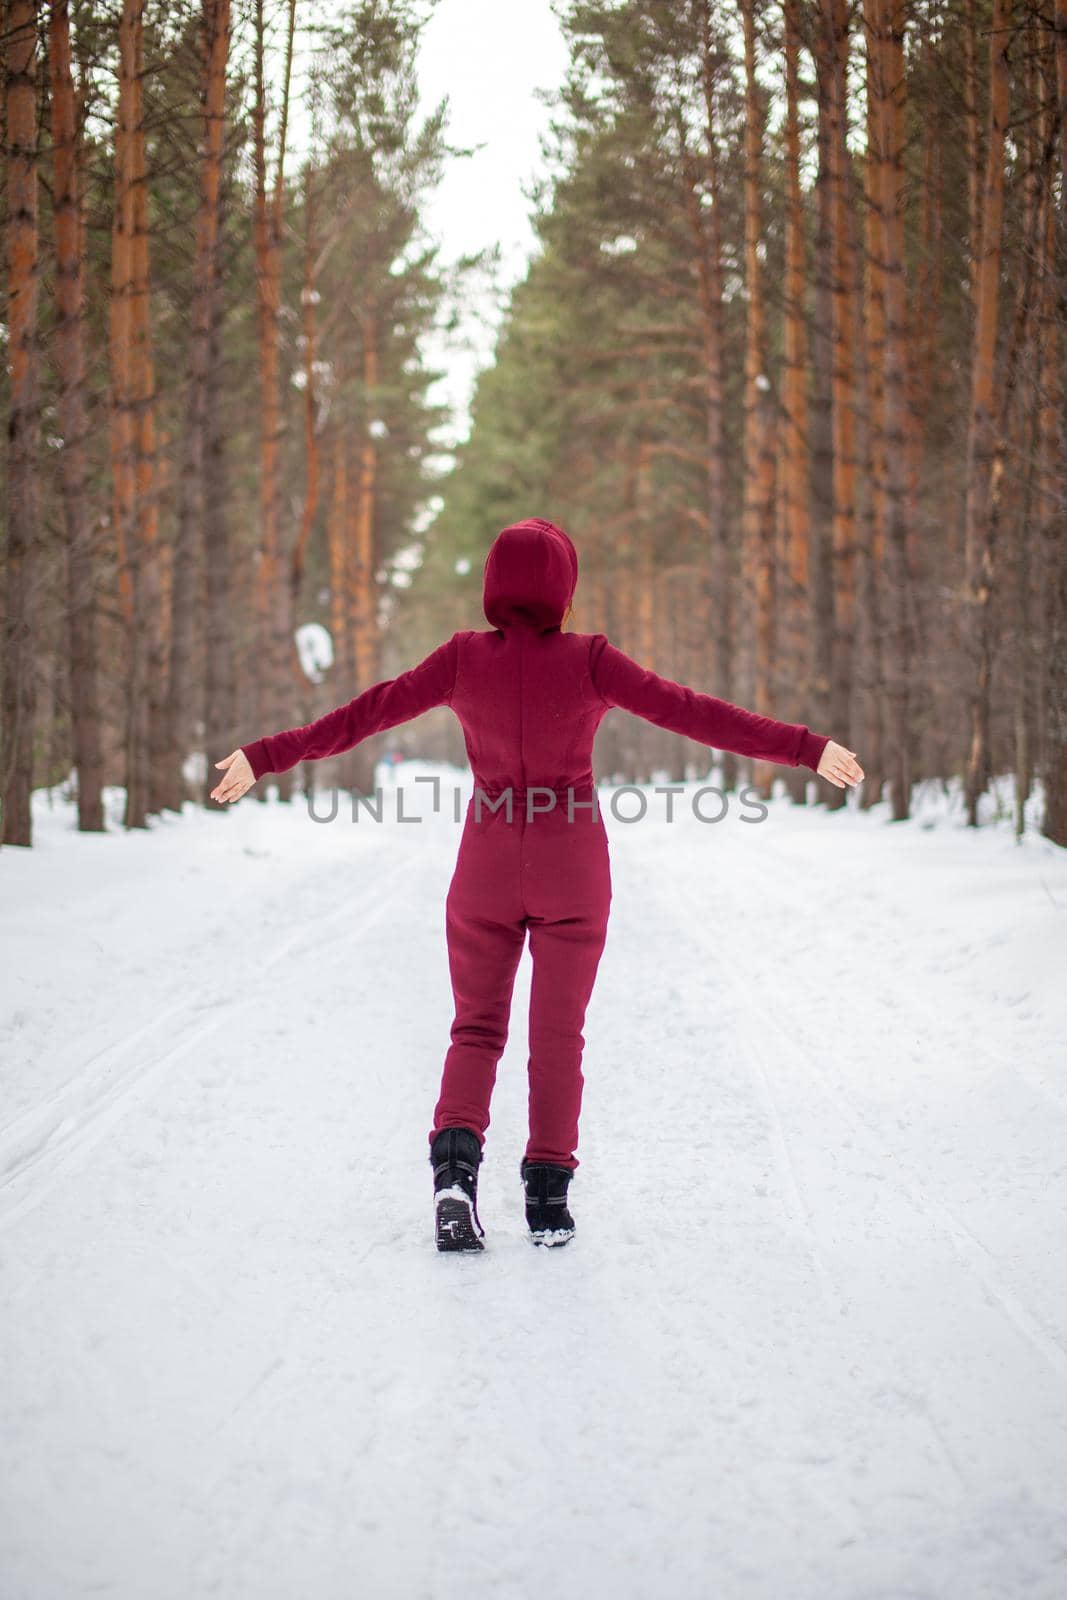 Winter walk in a snow-covered forest, A girl with a red jumpsuit and jacket walks among tall trees in nature. Solitude and relaxation from the hustle and bustle of the city.